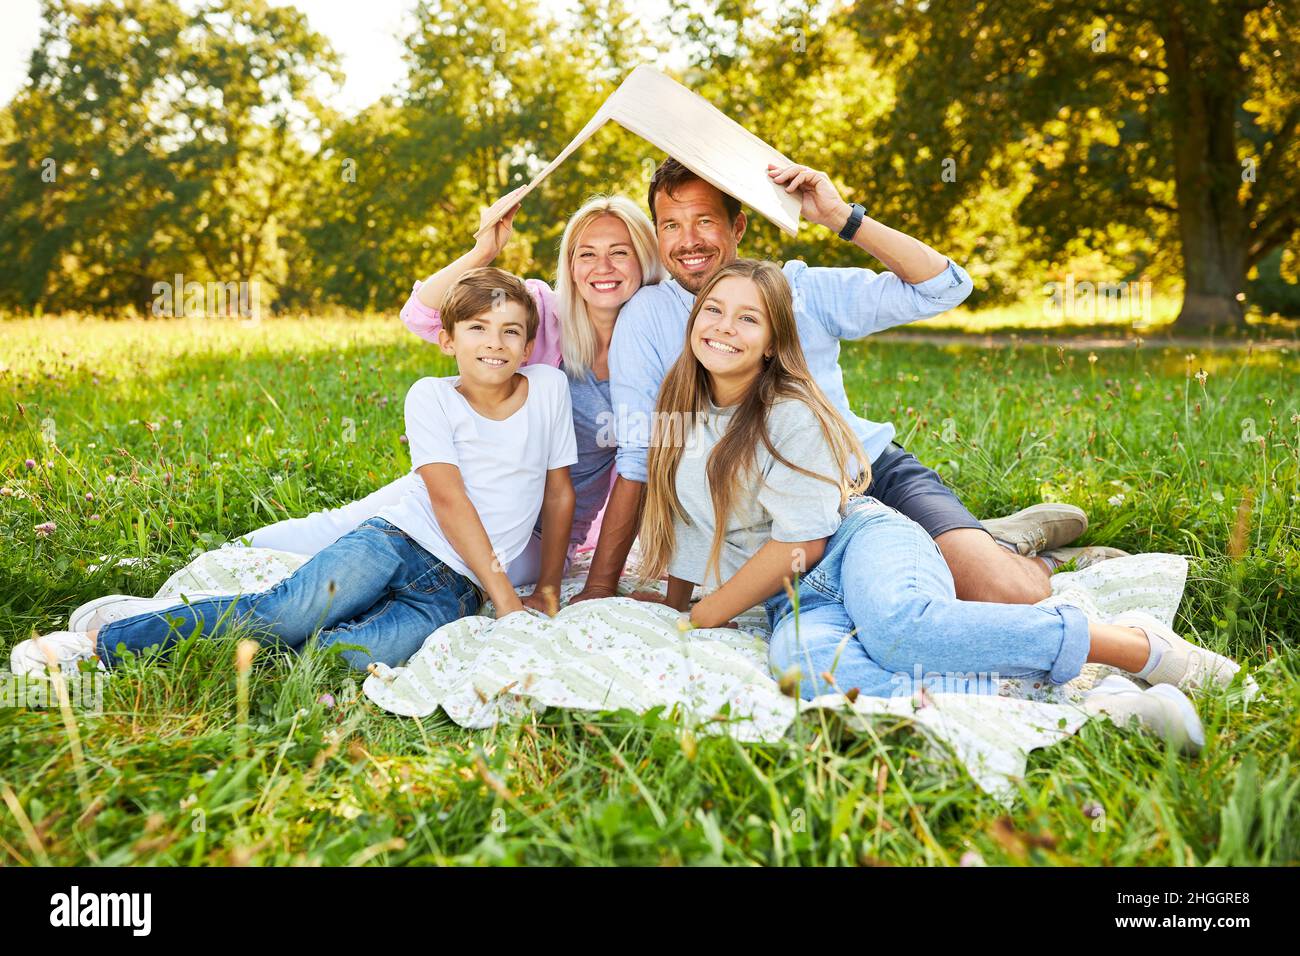 Happy family with two children and roof over their heads as a symbol of building a house Stock Photo